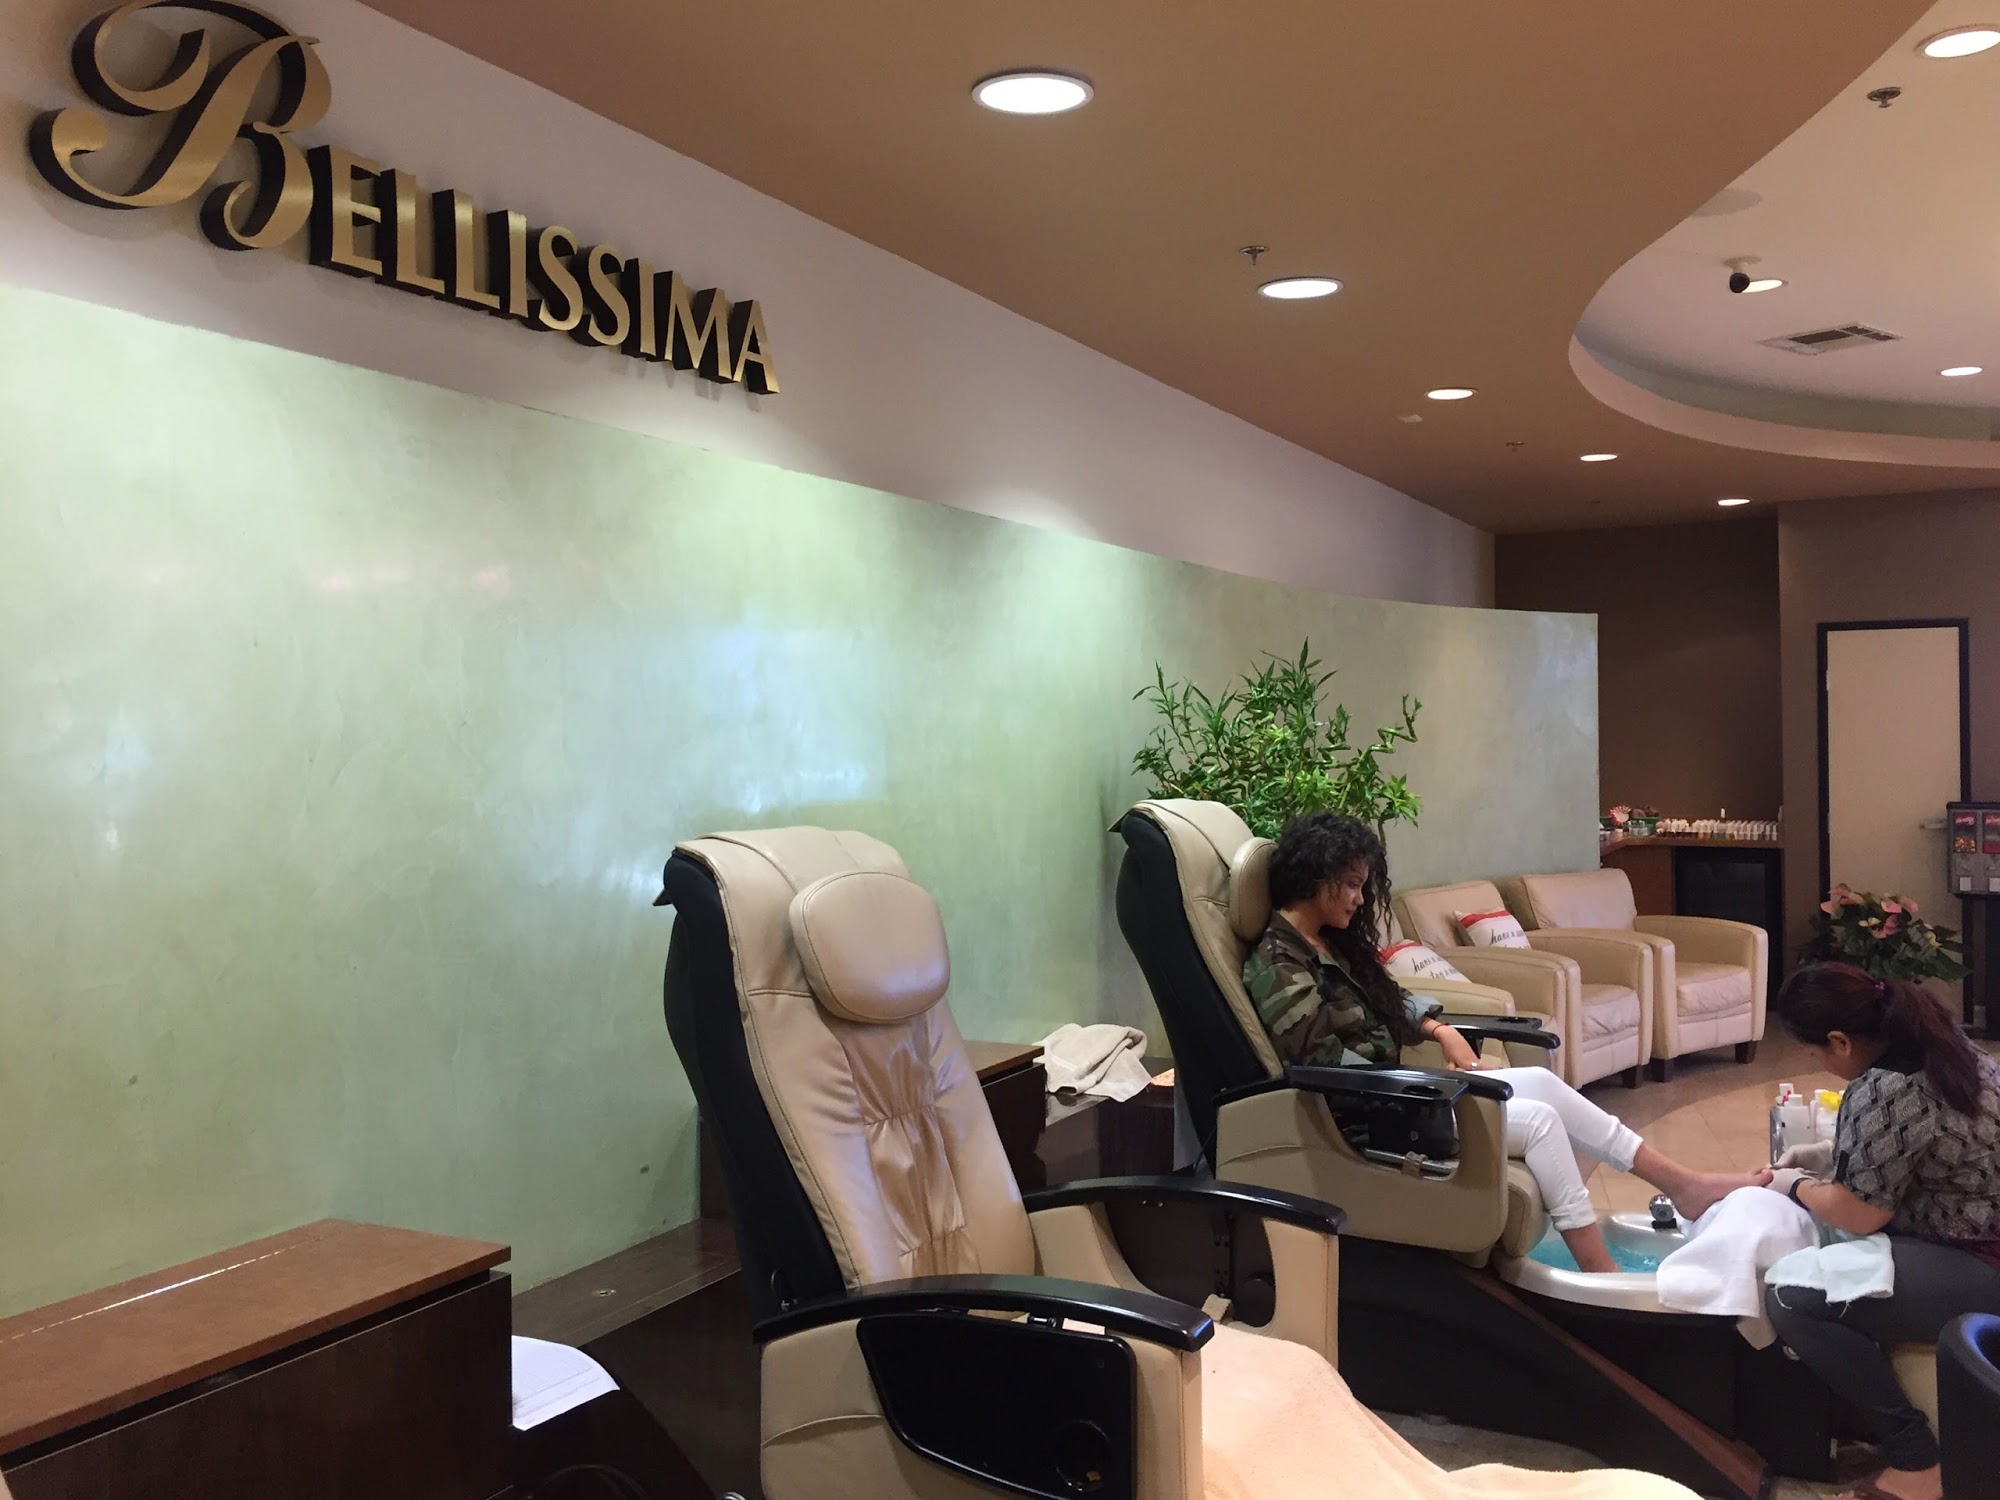 Bellissima Nail and Spa